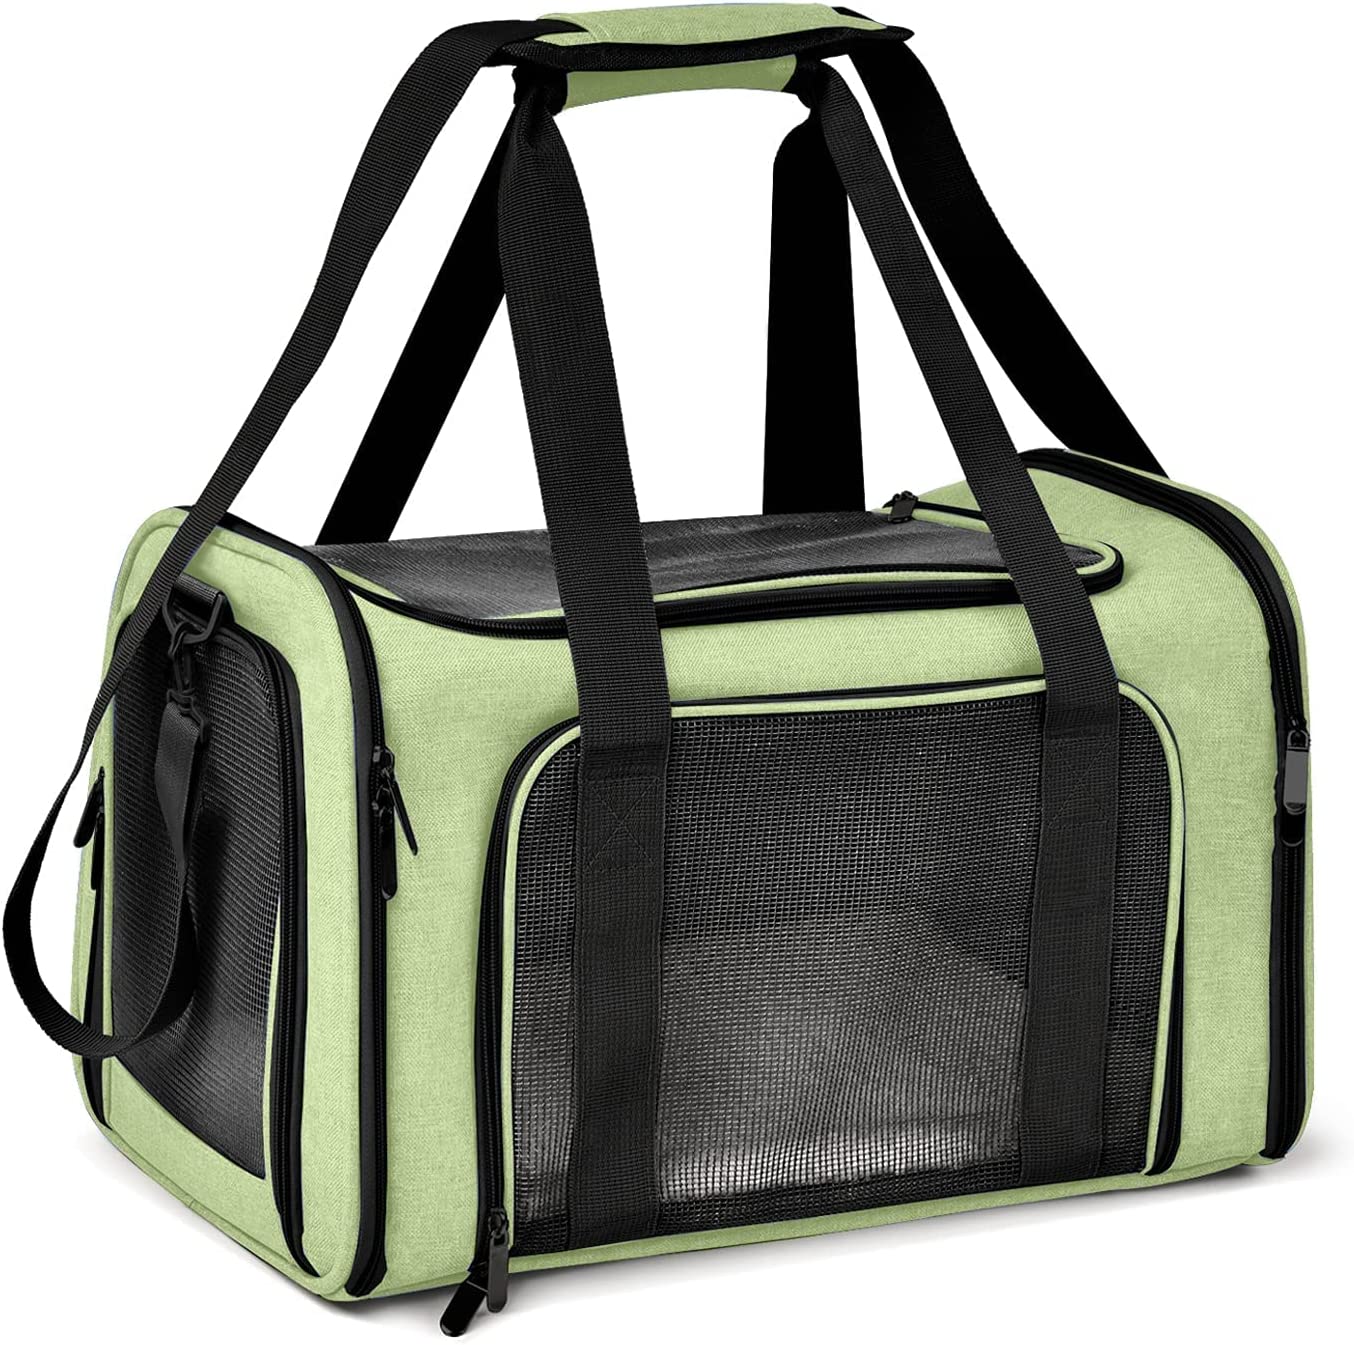 2. Henkelion Airline Approved Cat Carrier